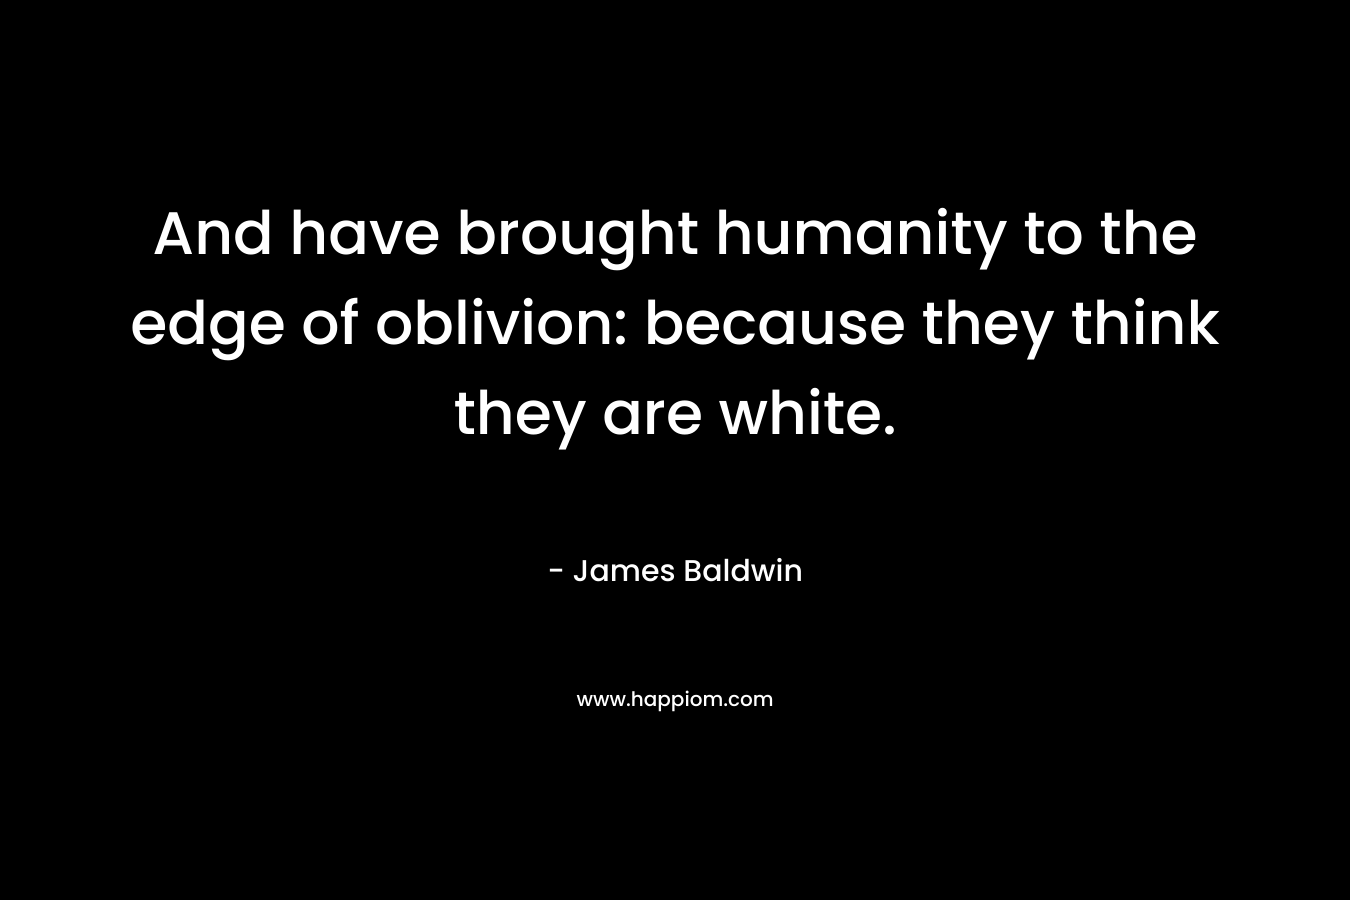 And have brought humanity to the edge of oblivion: because they think they are white.